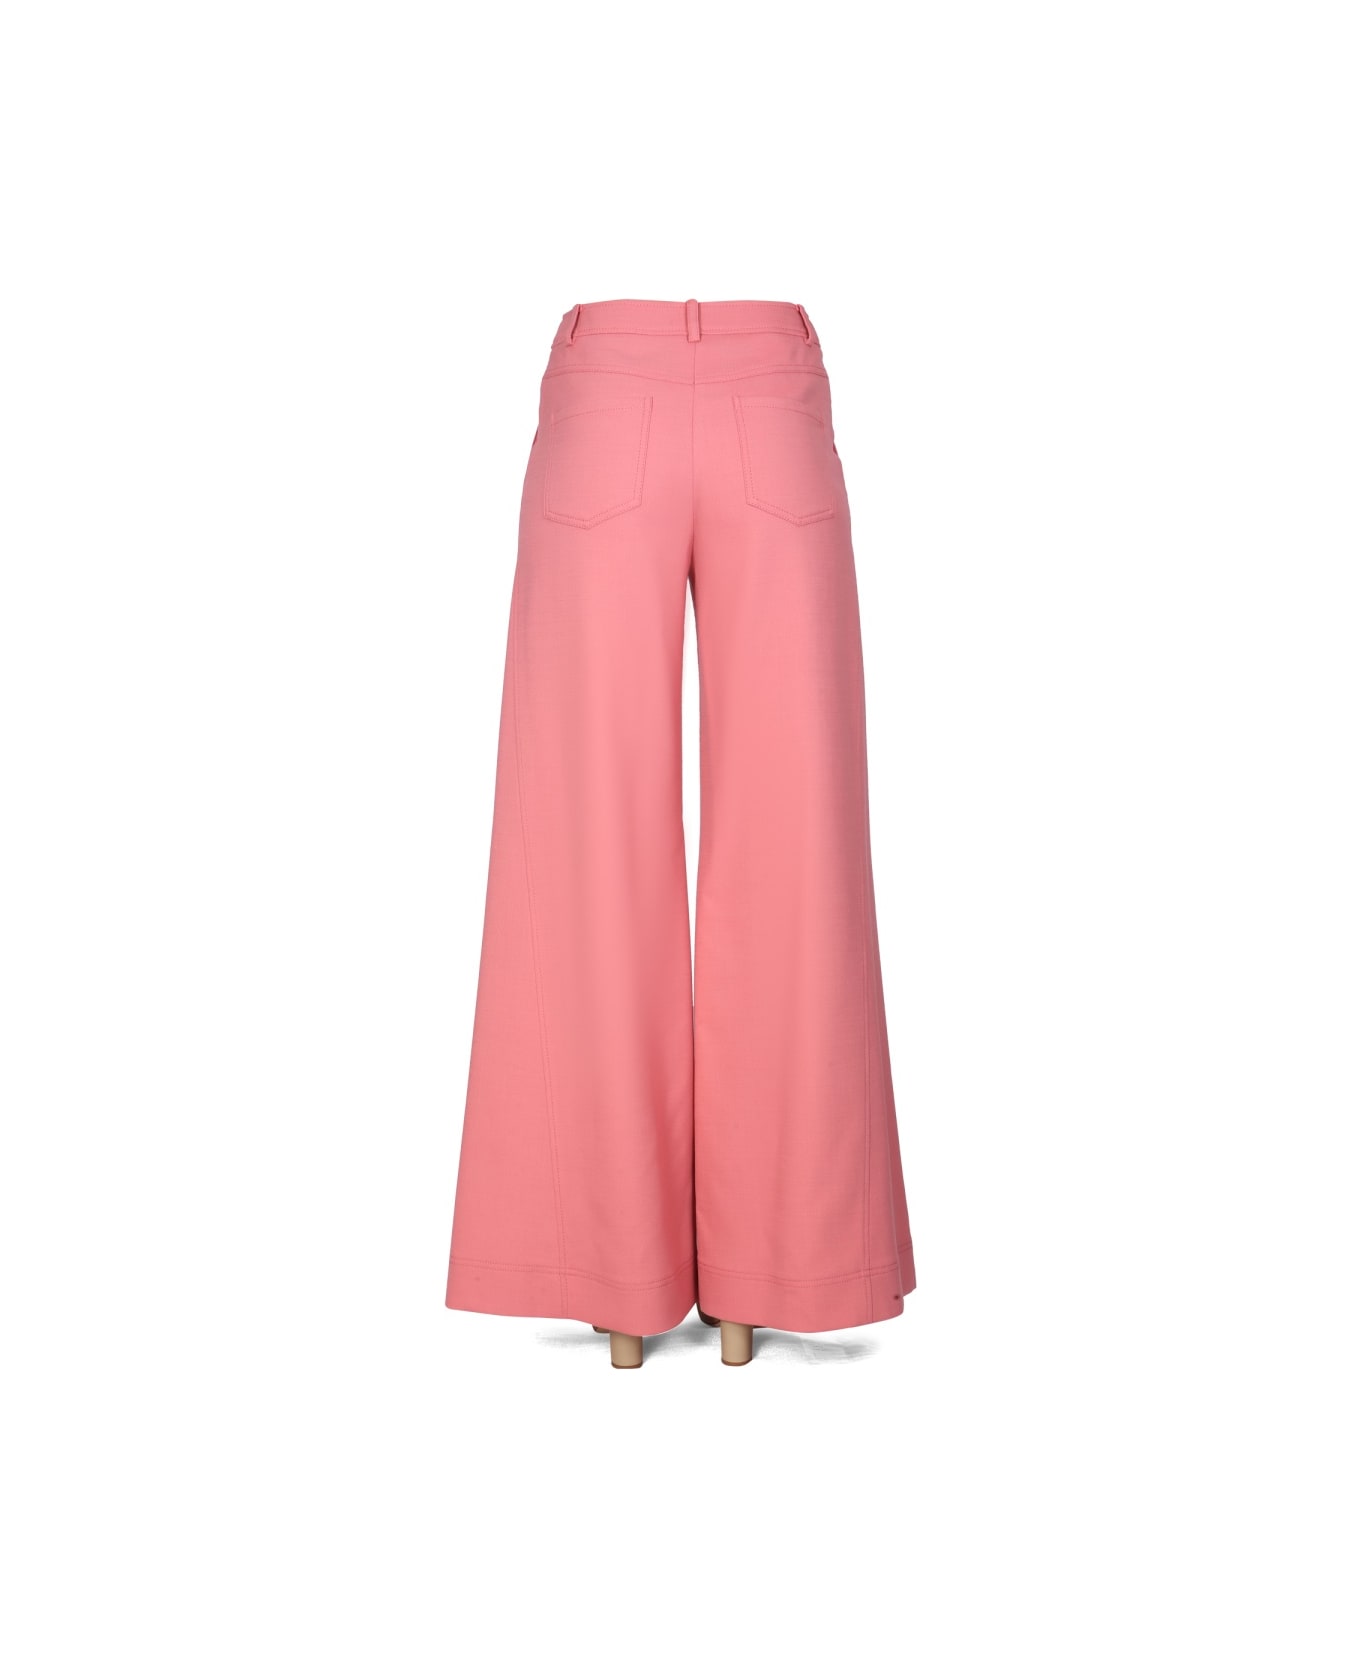 Boutique Moschino Chic Flare Pants - PINK